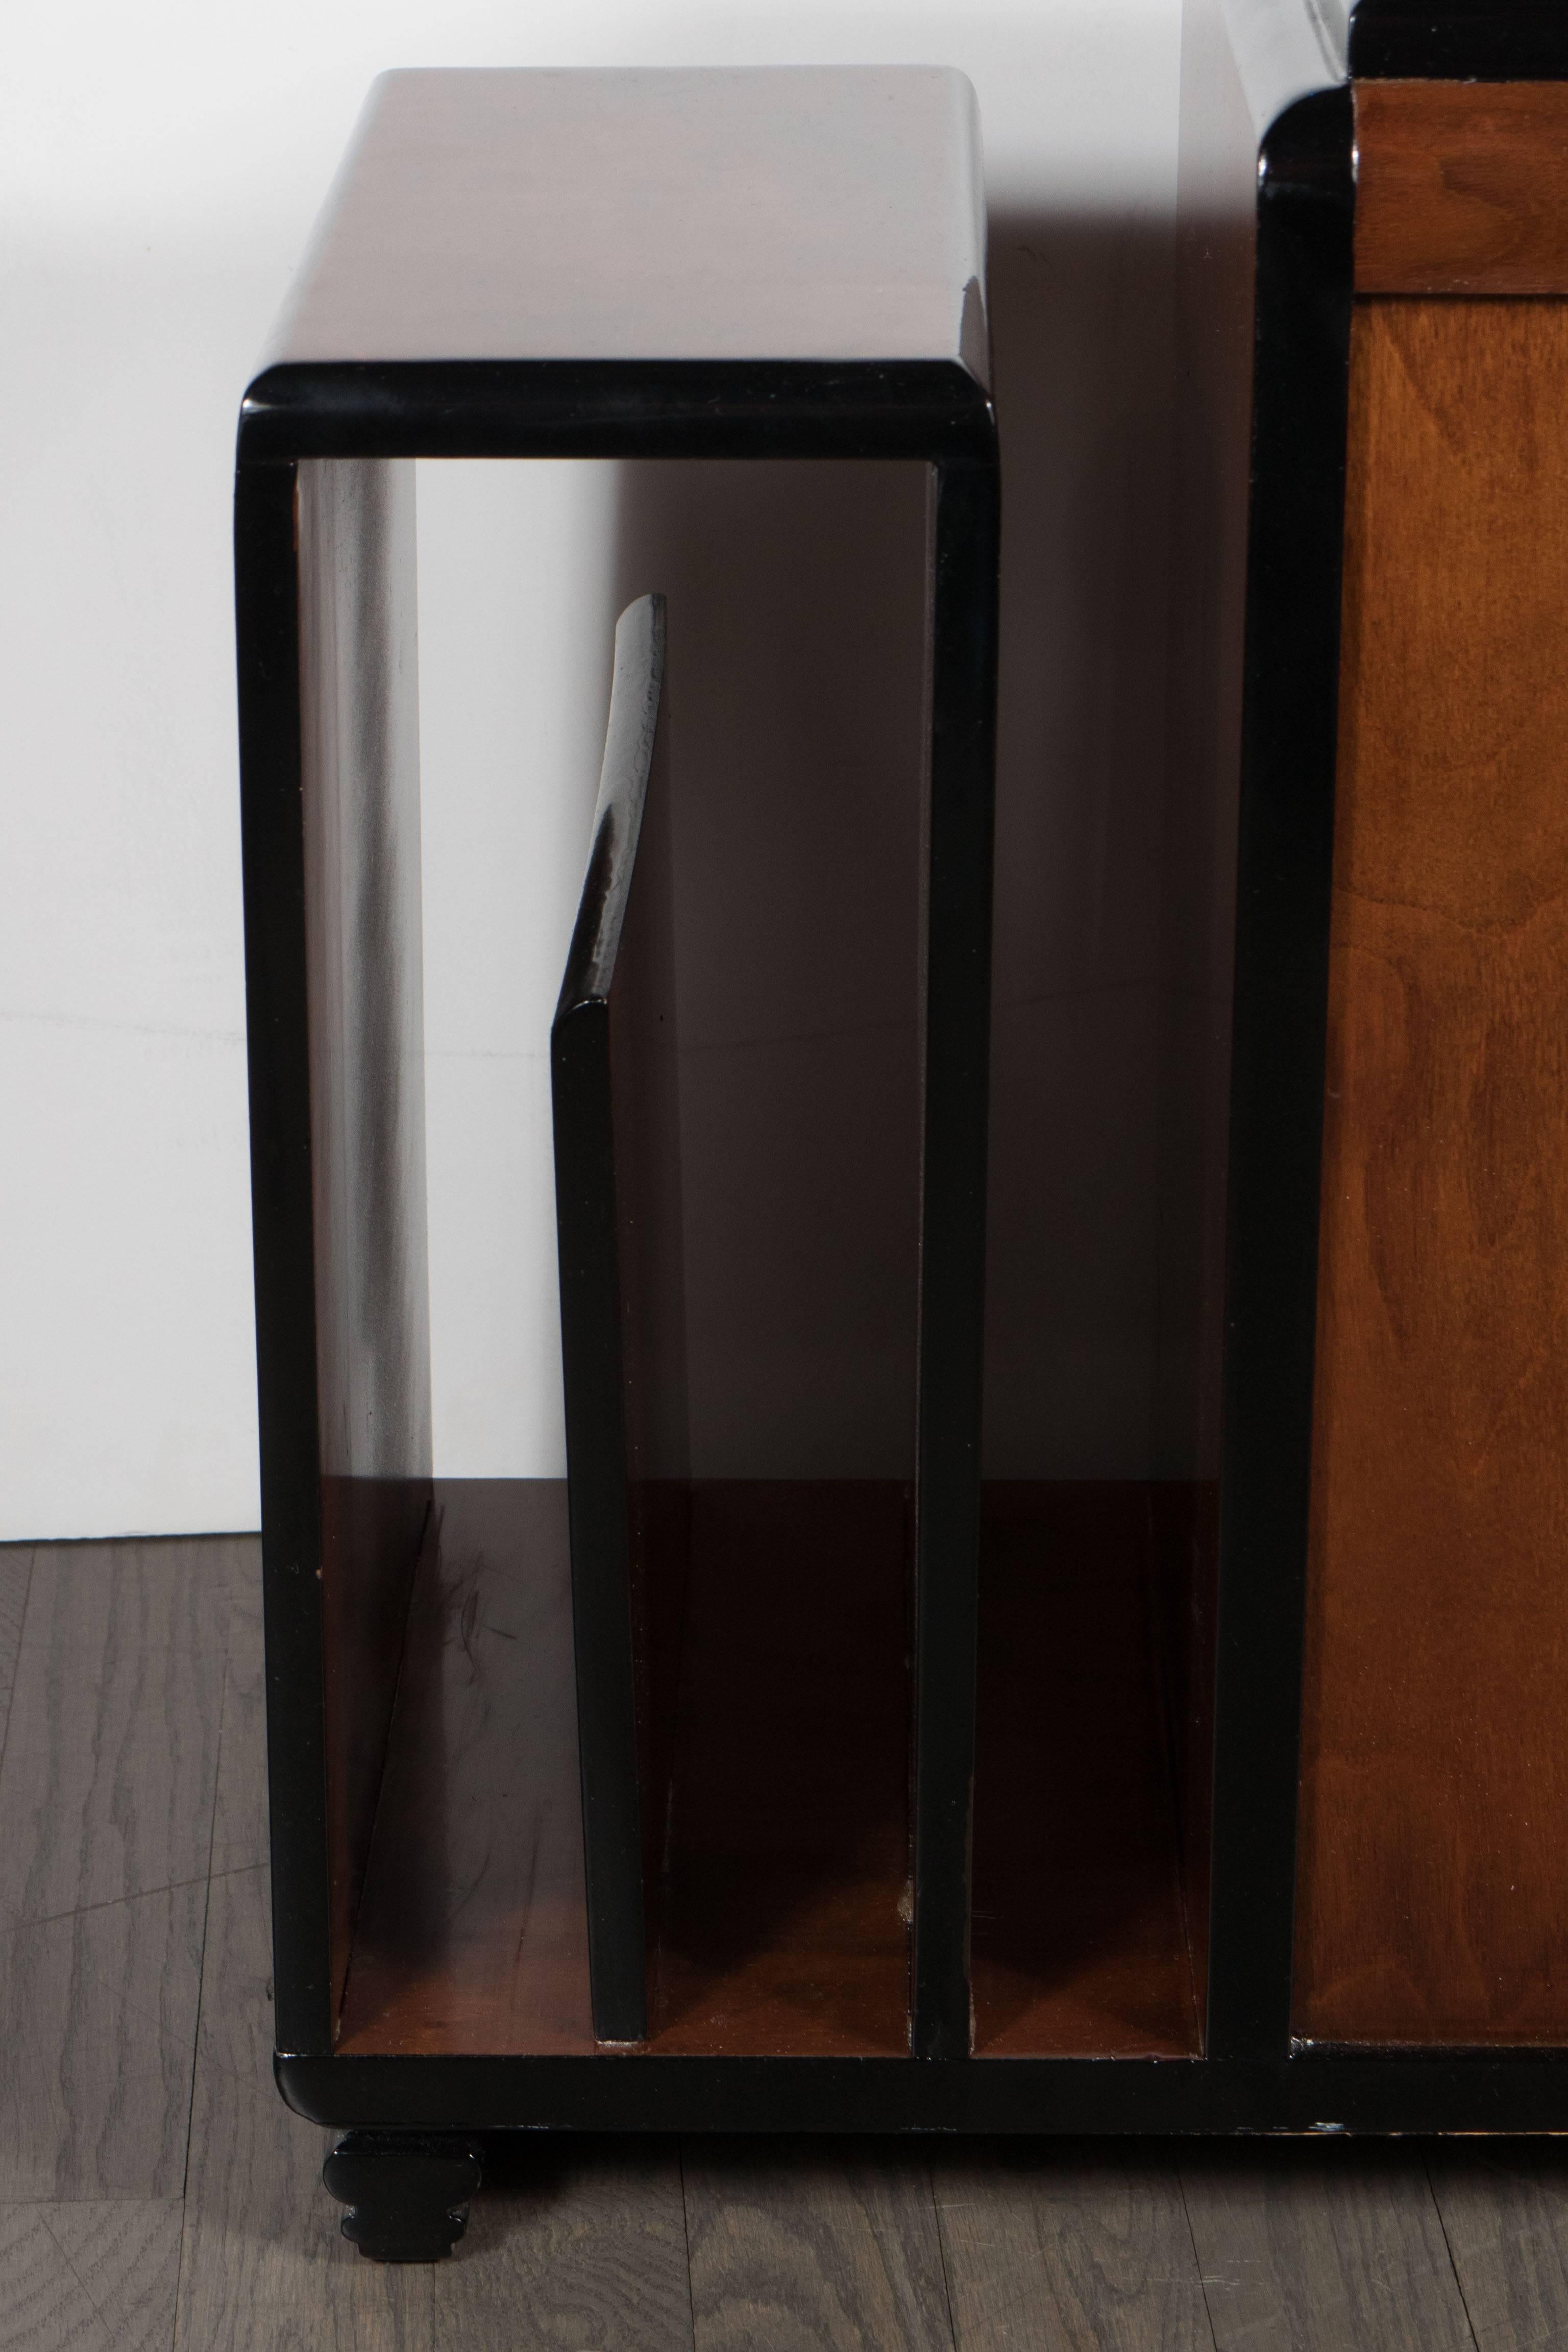 Art Deco walnut and black lacquer magazine or occasional table. A wonderful bookmatched burled walnut covers every exposed surface of the piece. Its front and back feature black lacquer detailing. The piece rests on lacquered feet with